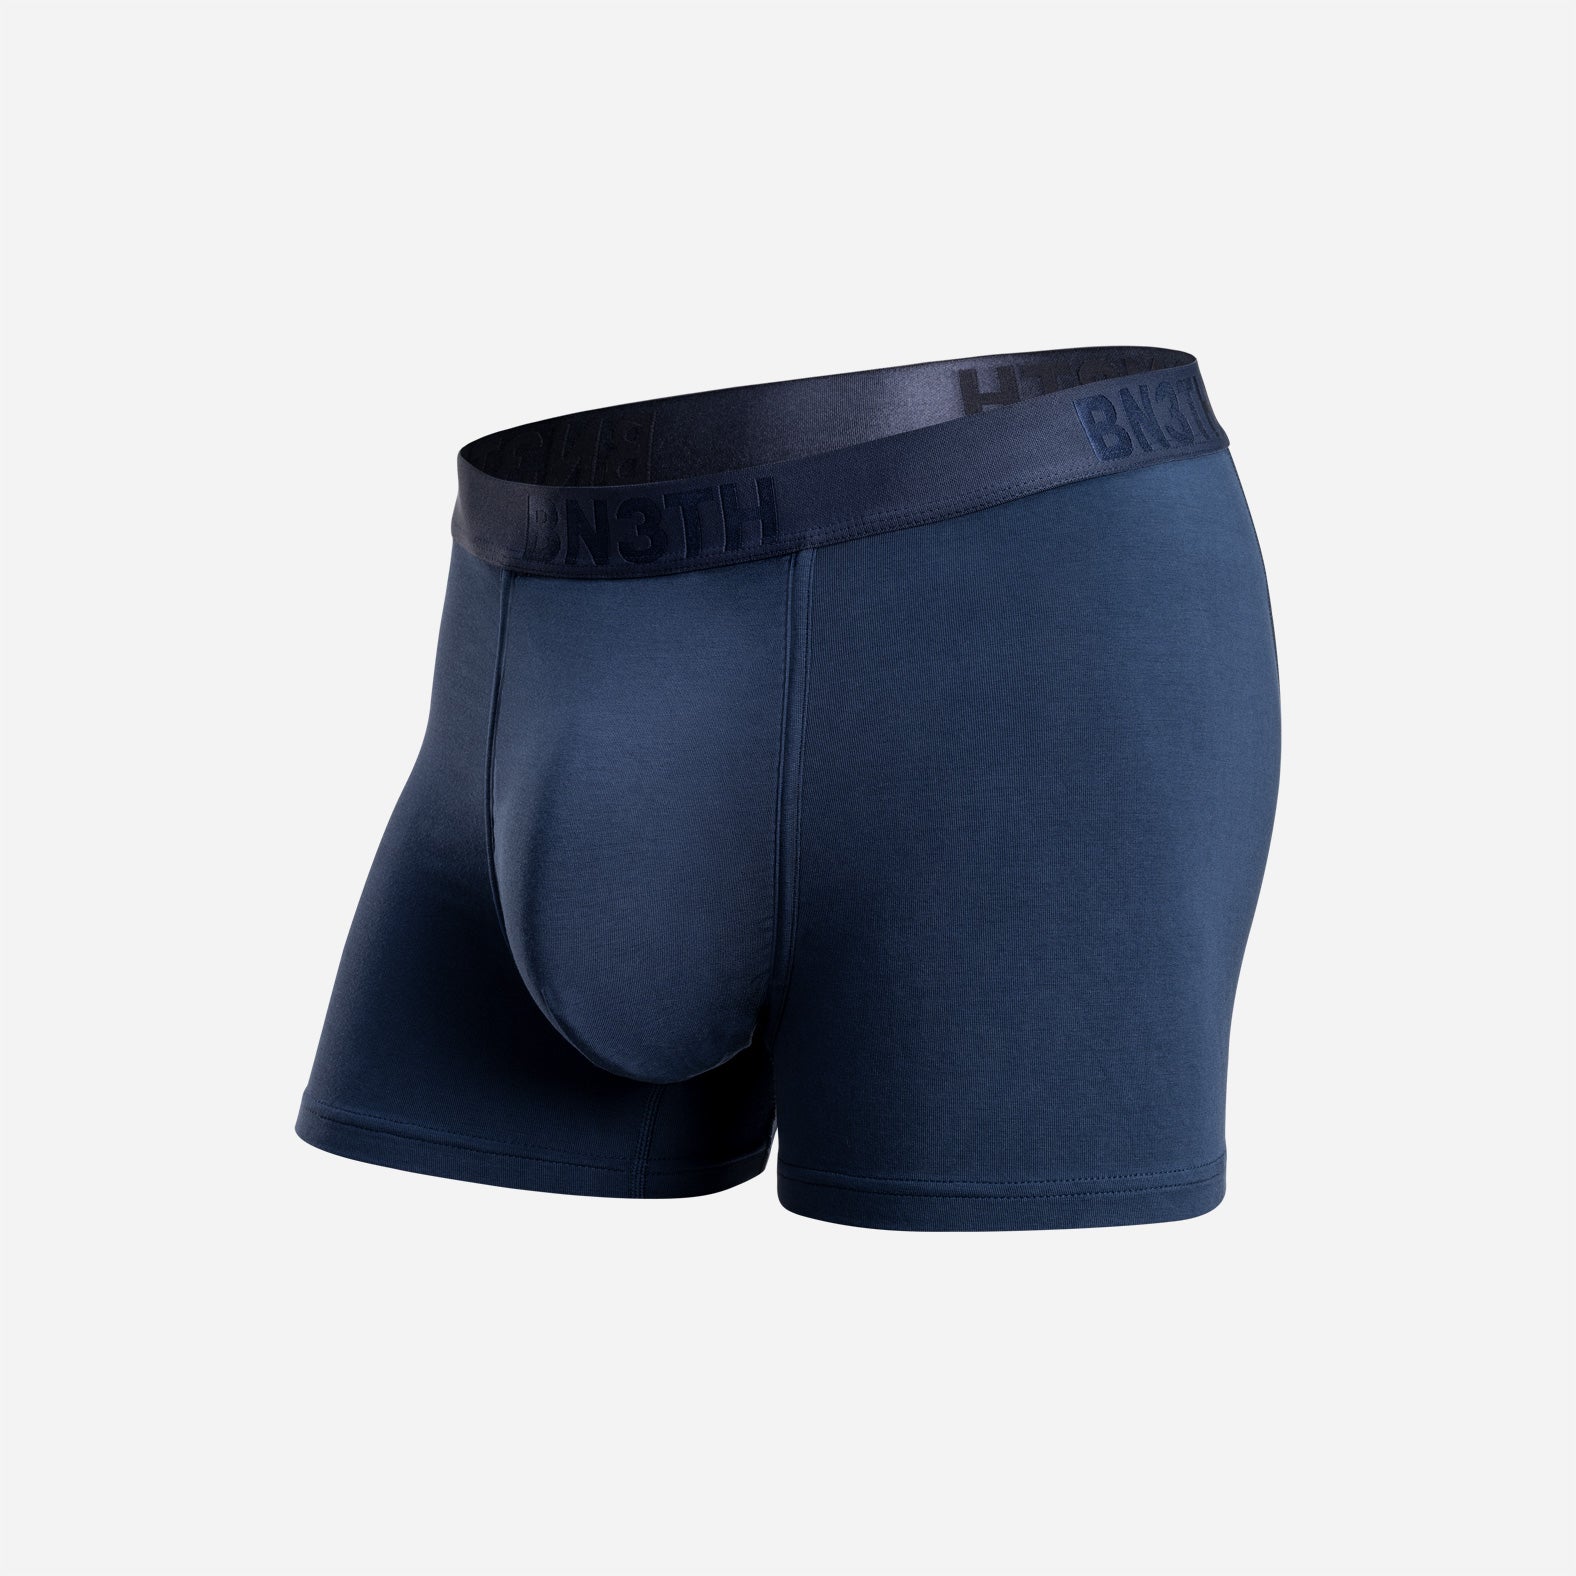 BN3TH Men's Classic Truck Athletic Boxers, Large (2 Pack - Black/Navy) at   Men's Clothing store